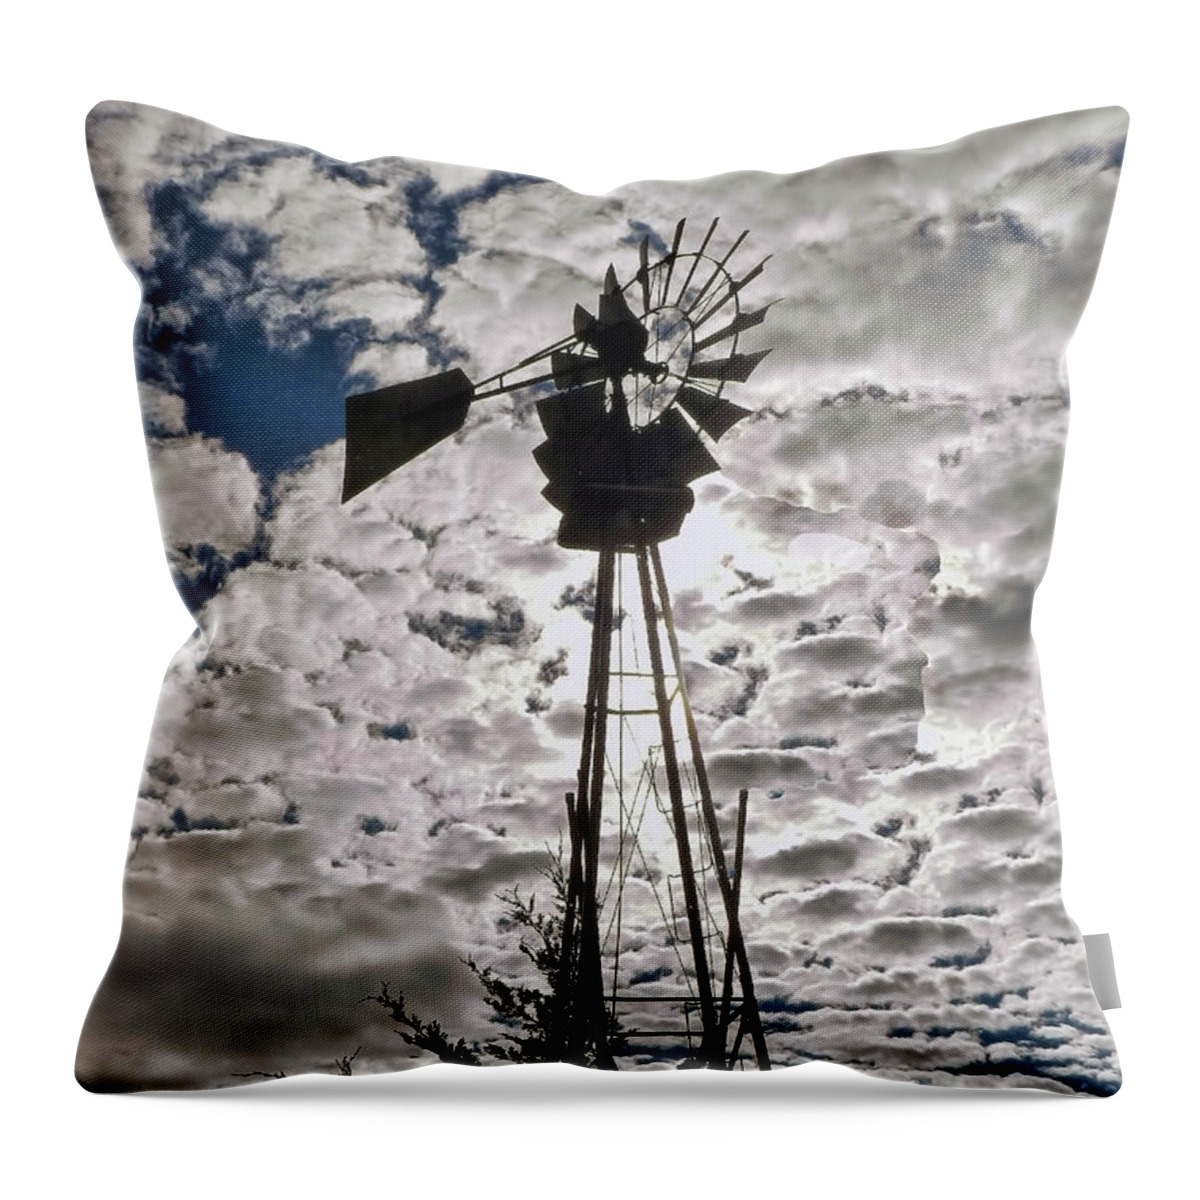 Windmill Throw Pillow featuring the digital art Windmill in the clouds by Cathy Anderson